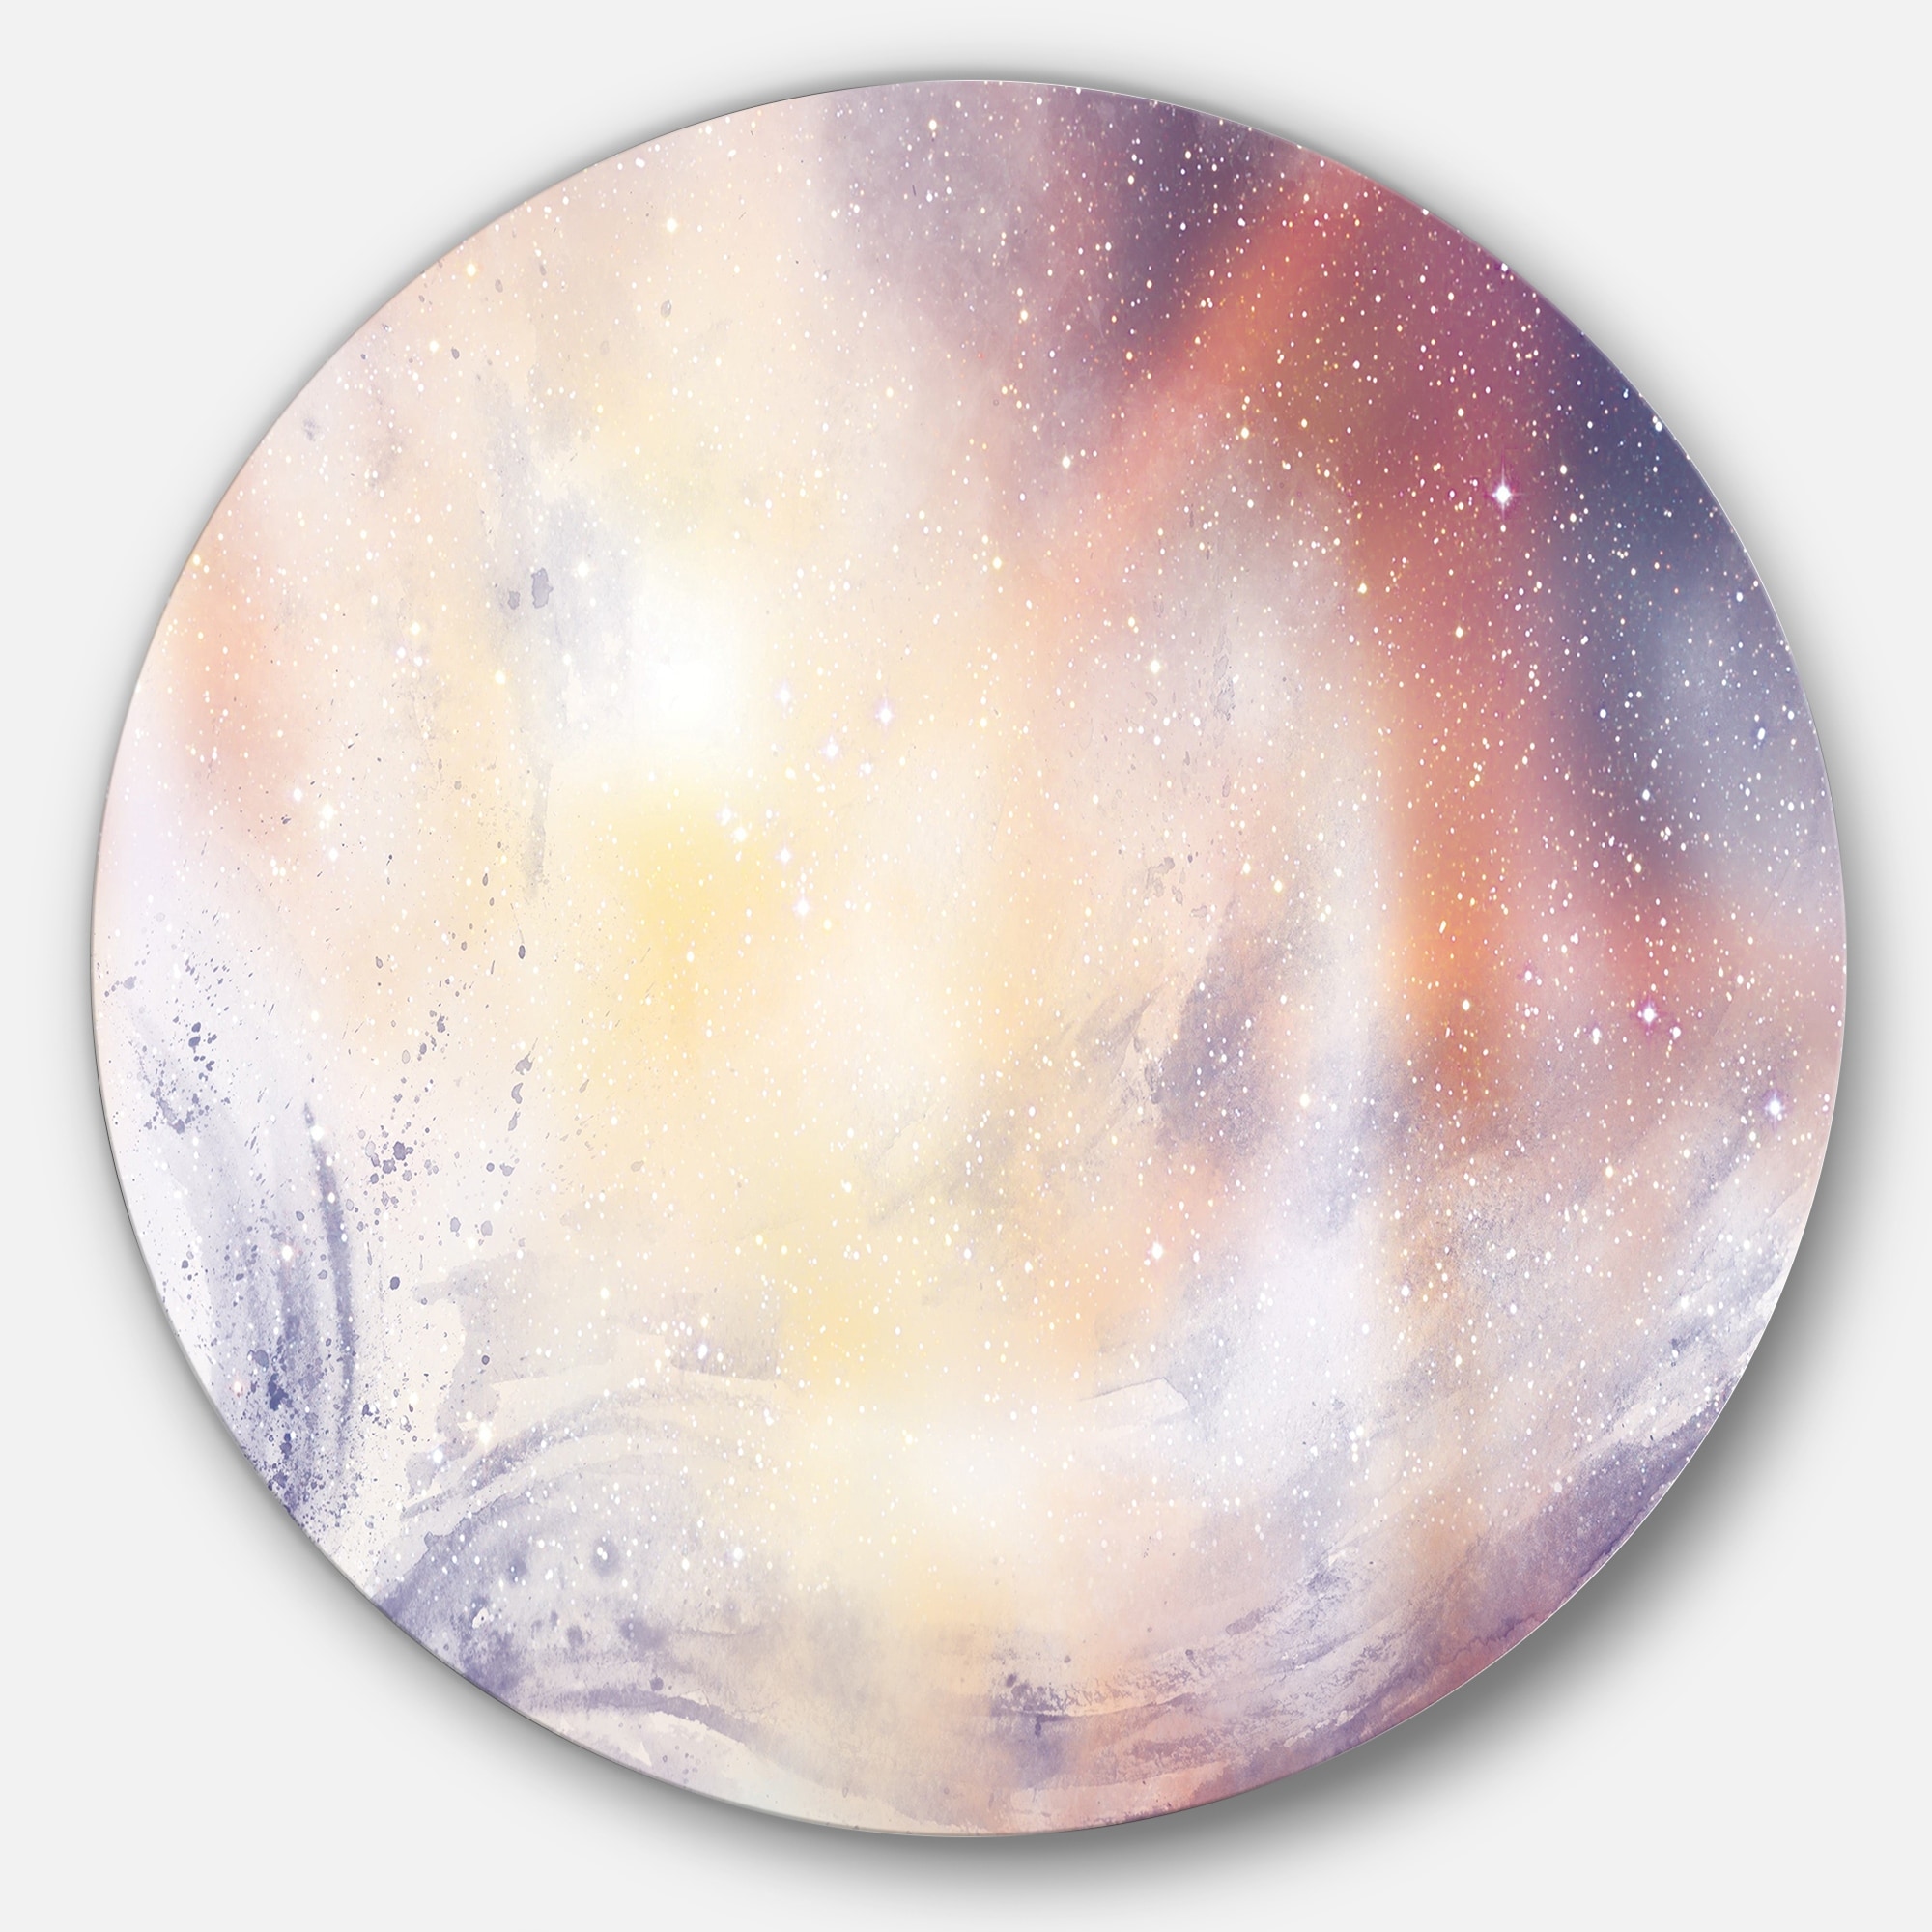 Designart 'Blurry Watercolor with Star' Abstract Round Metal Wall Art